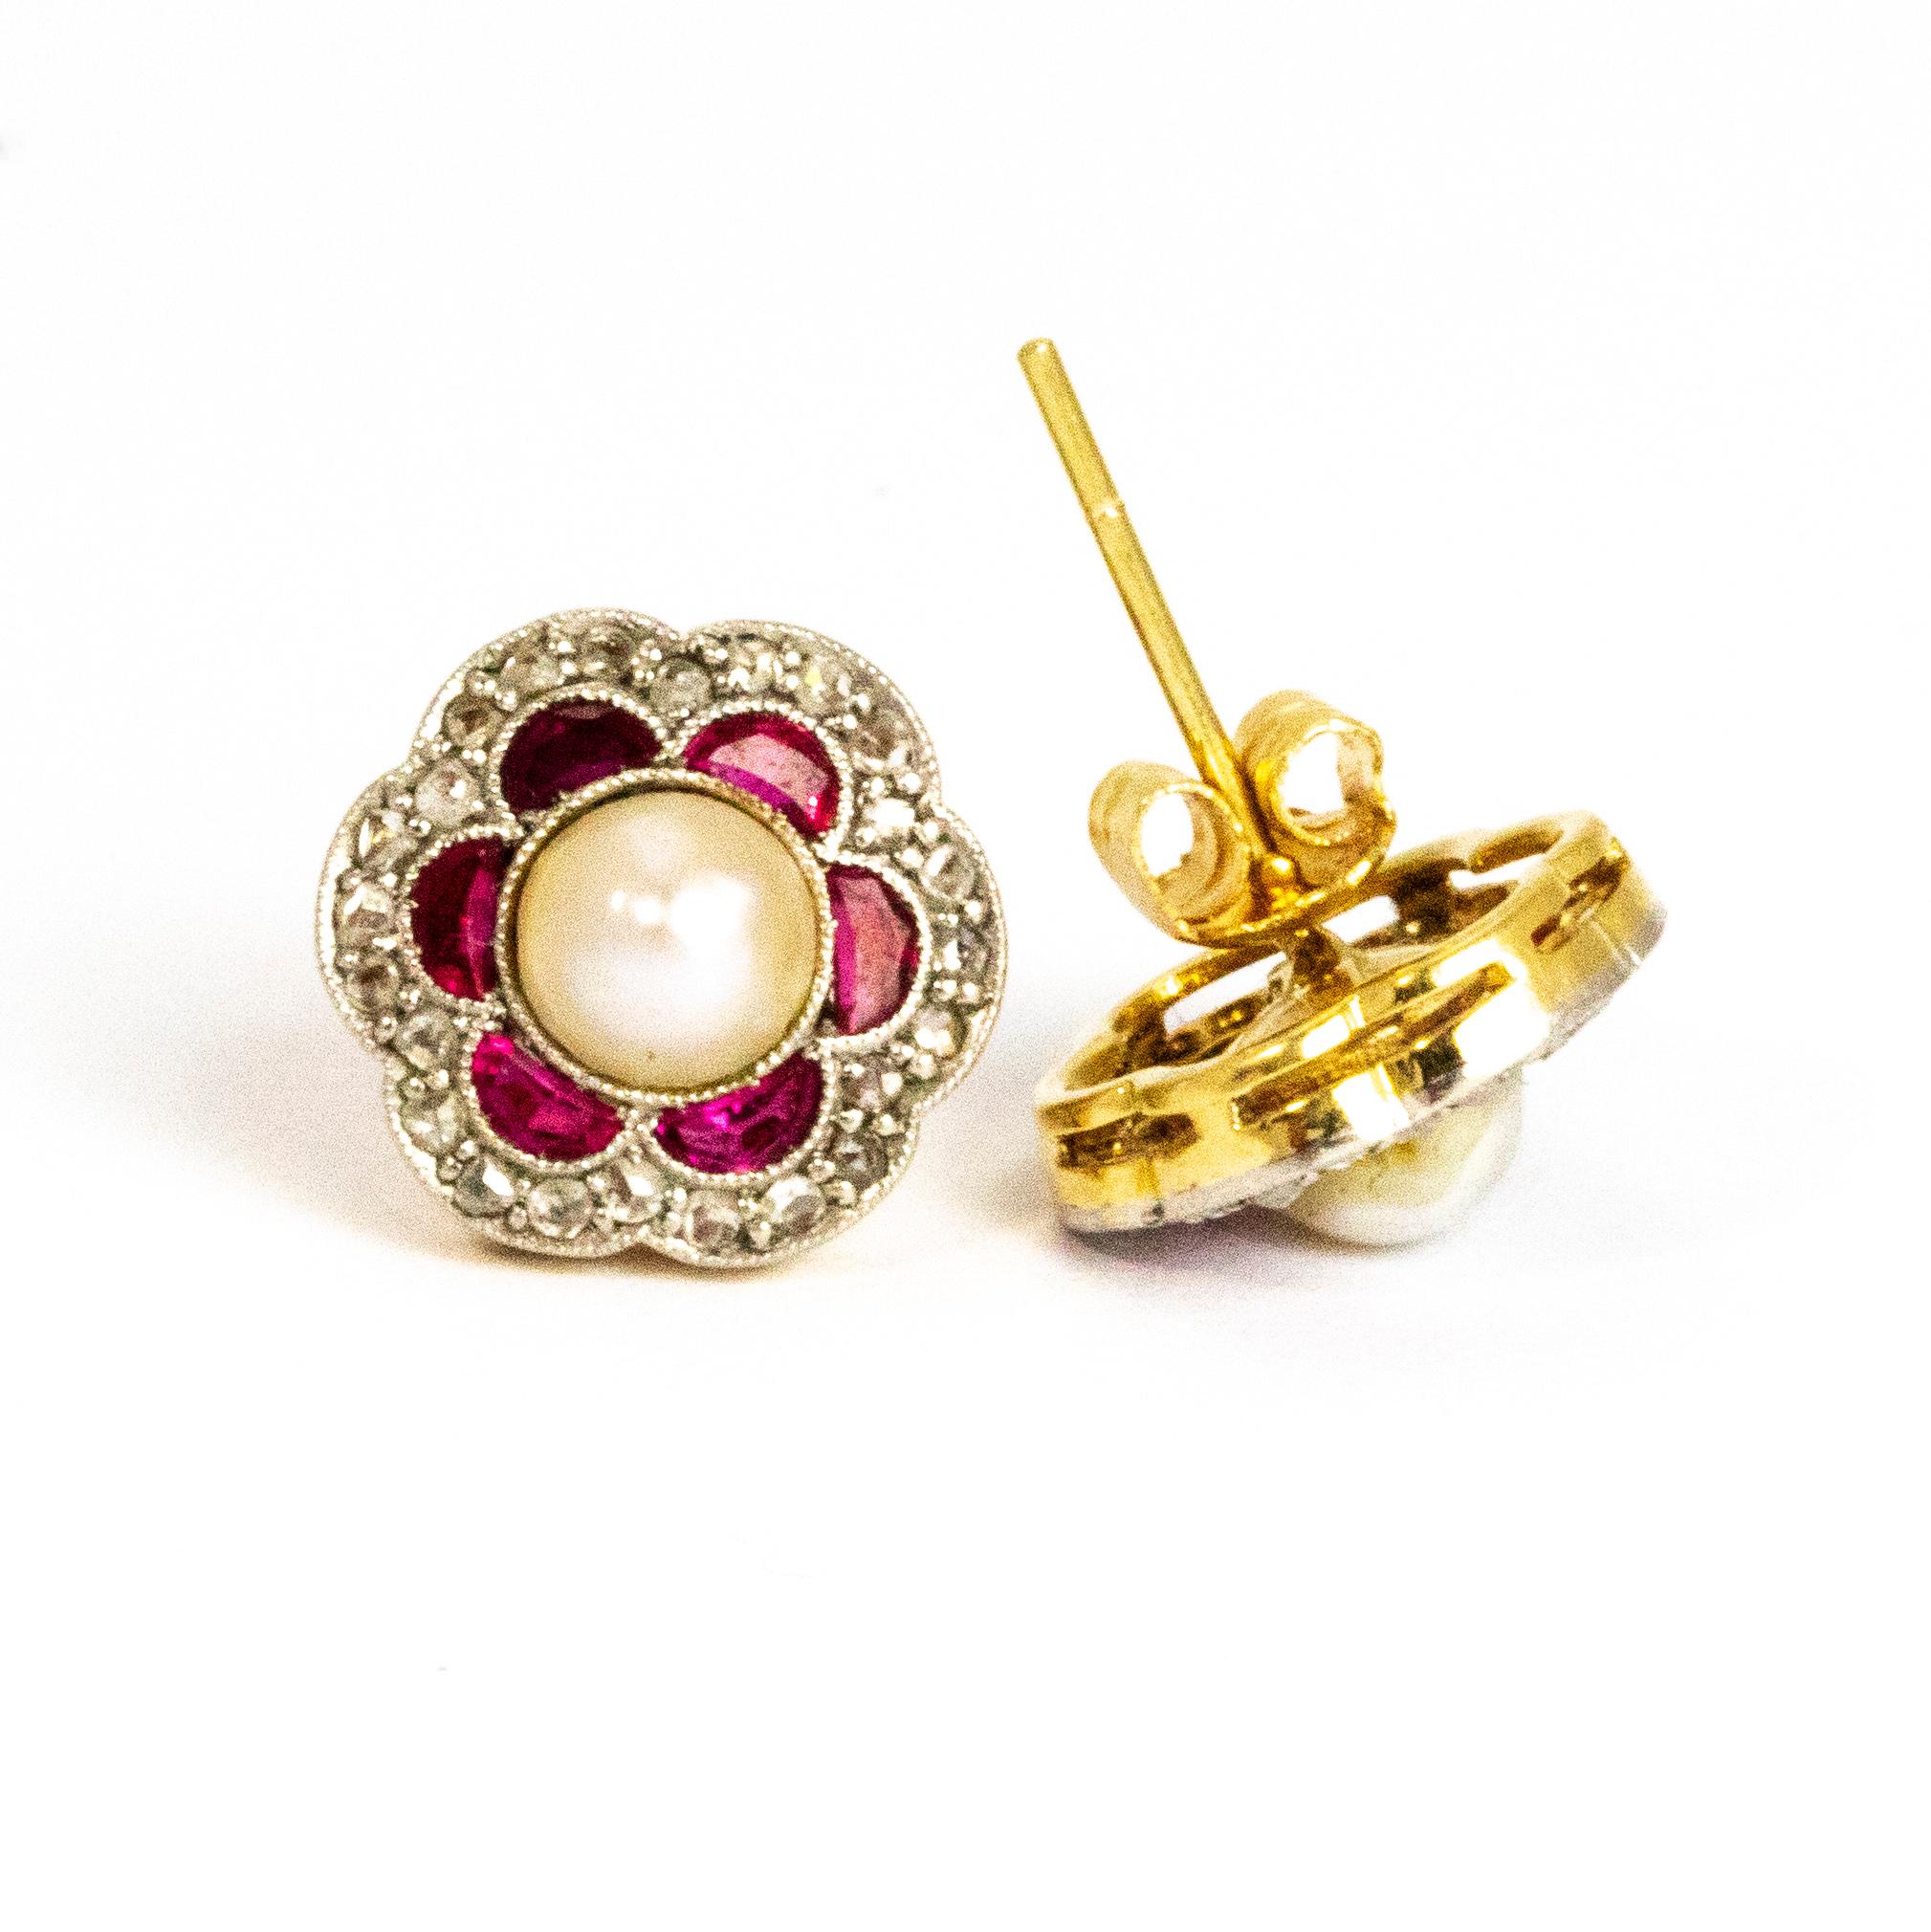 This pair of Vintage cluster earrings are classically stunning. They hold a lovely size pearl at the centre of the cluster which is surrounded by crescent Rubies. The outer edge of the earrings hosts an outline of tiny diamonds that give a charming